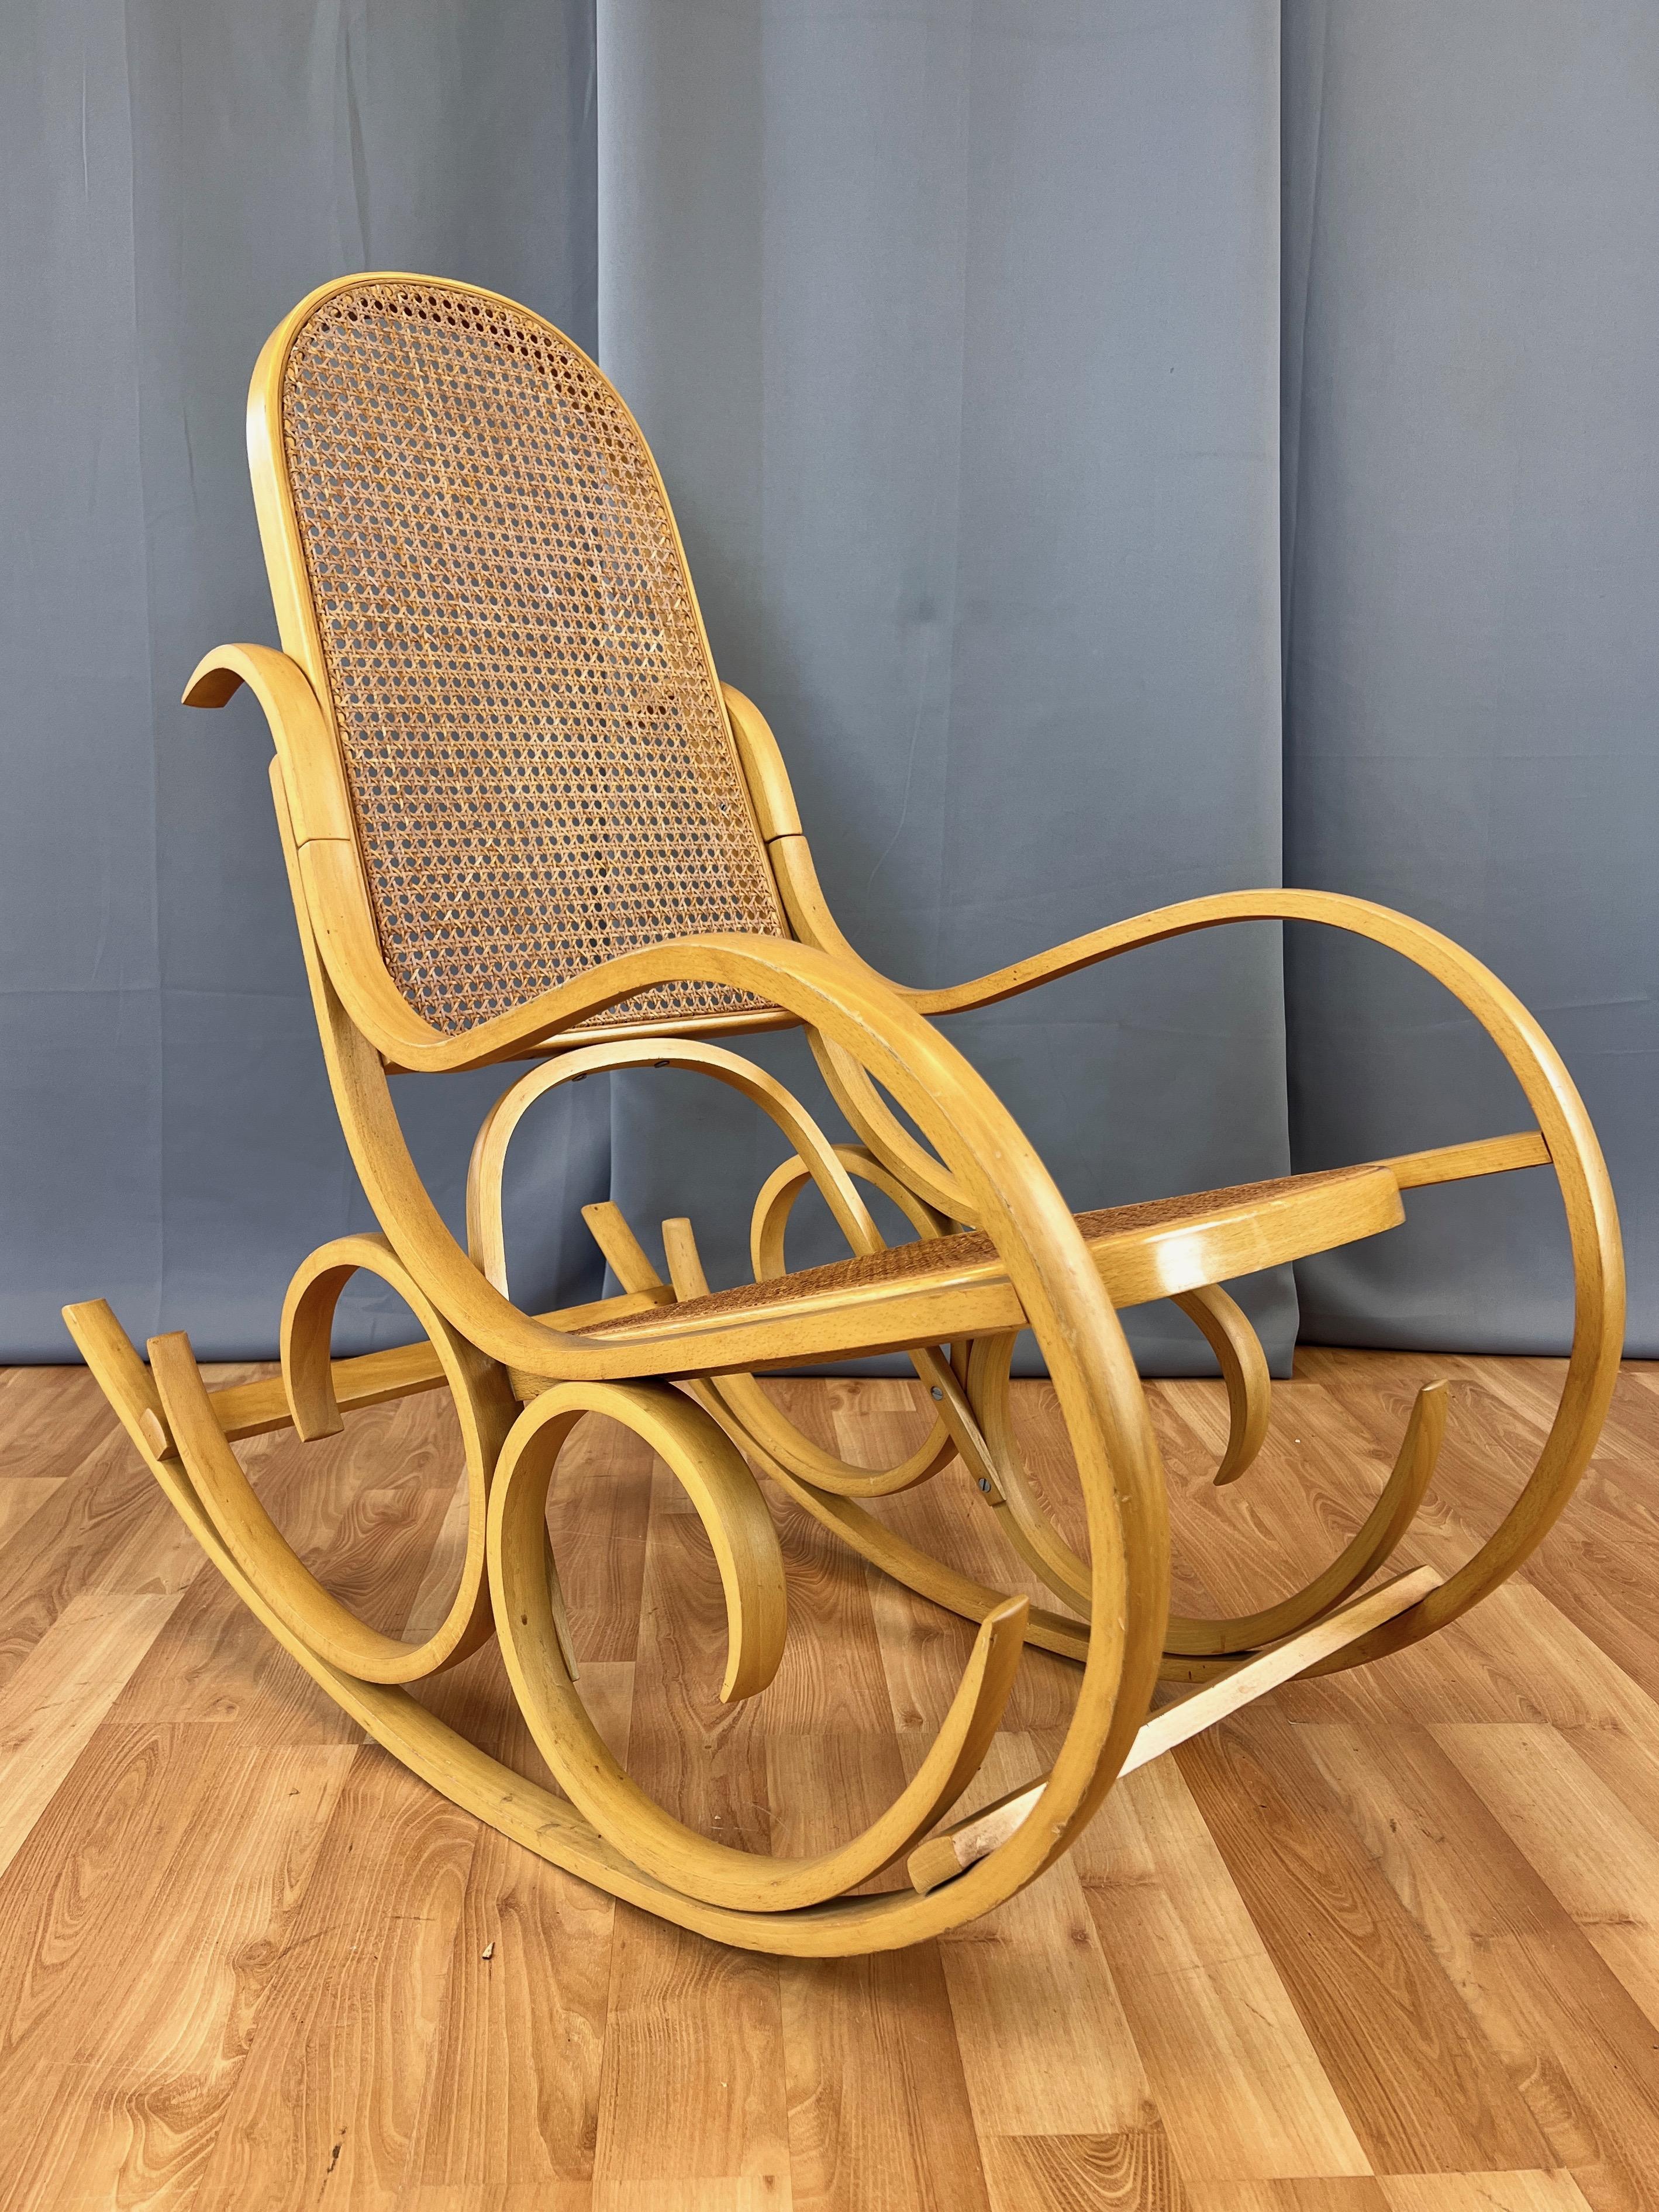 A fantastic 1970s Italian bentwood and woven cane rocking chair by Luigi Crassevig.

Visually striking and perfectly proportioned frame features elegantly hand-crafted blonde bentwood curves, filigrees, and flourishes. Calls to mind similar